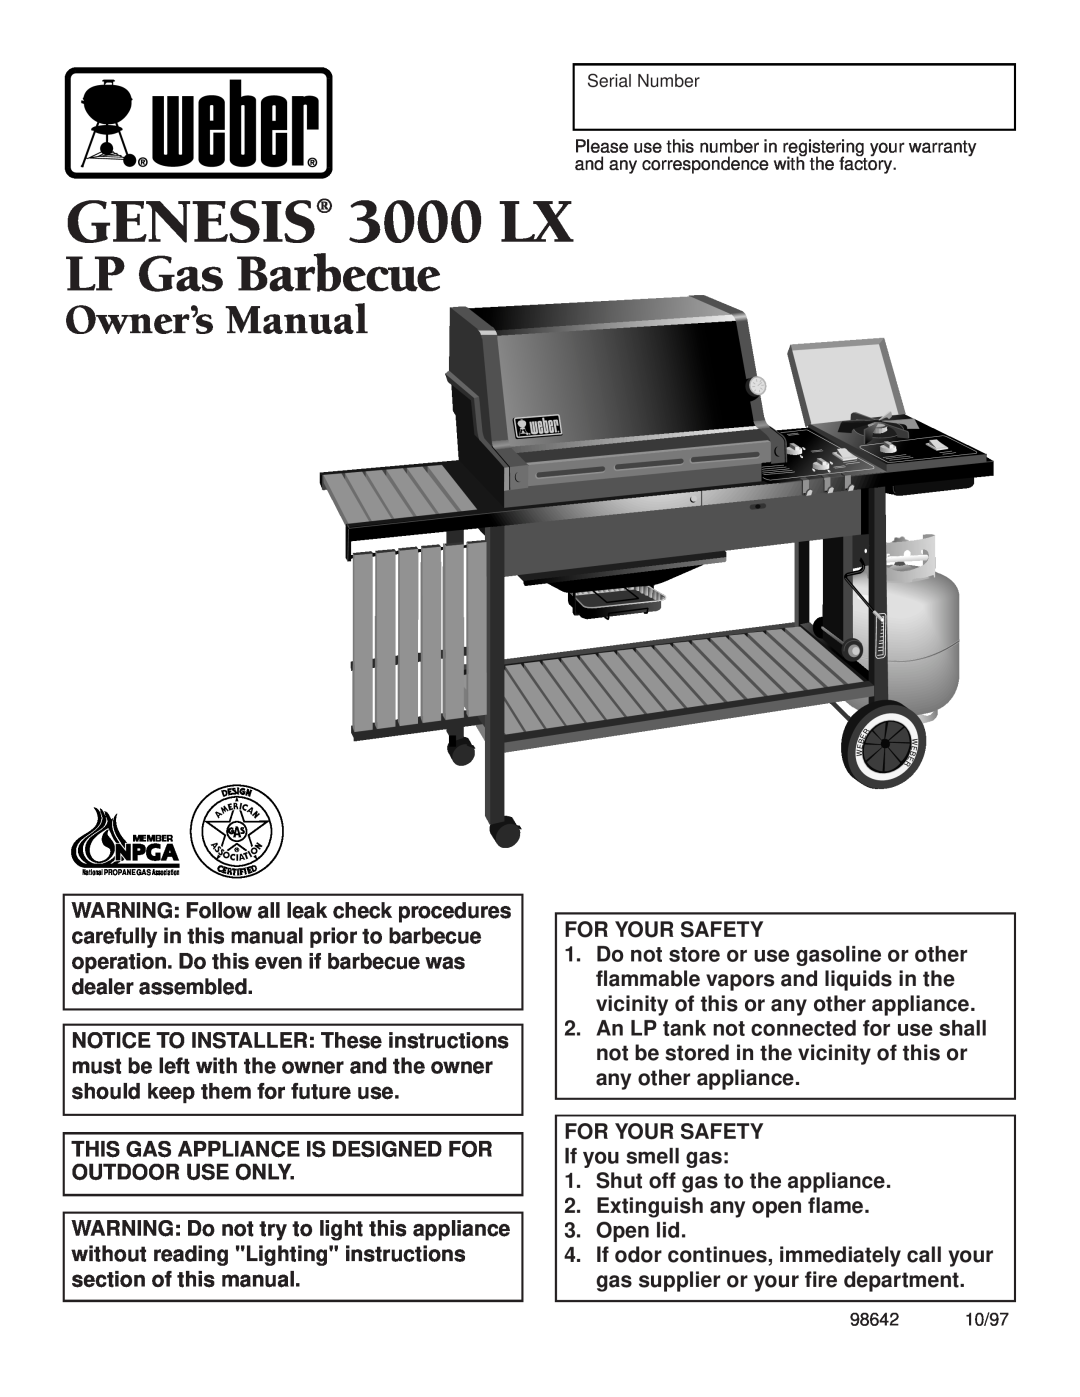 Weber 98642 owner manual LP Gas Barbecue, GENESIS 3000 LX, For Your Safety, FOR YOUR SAFETY If you smell gas 